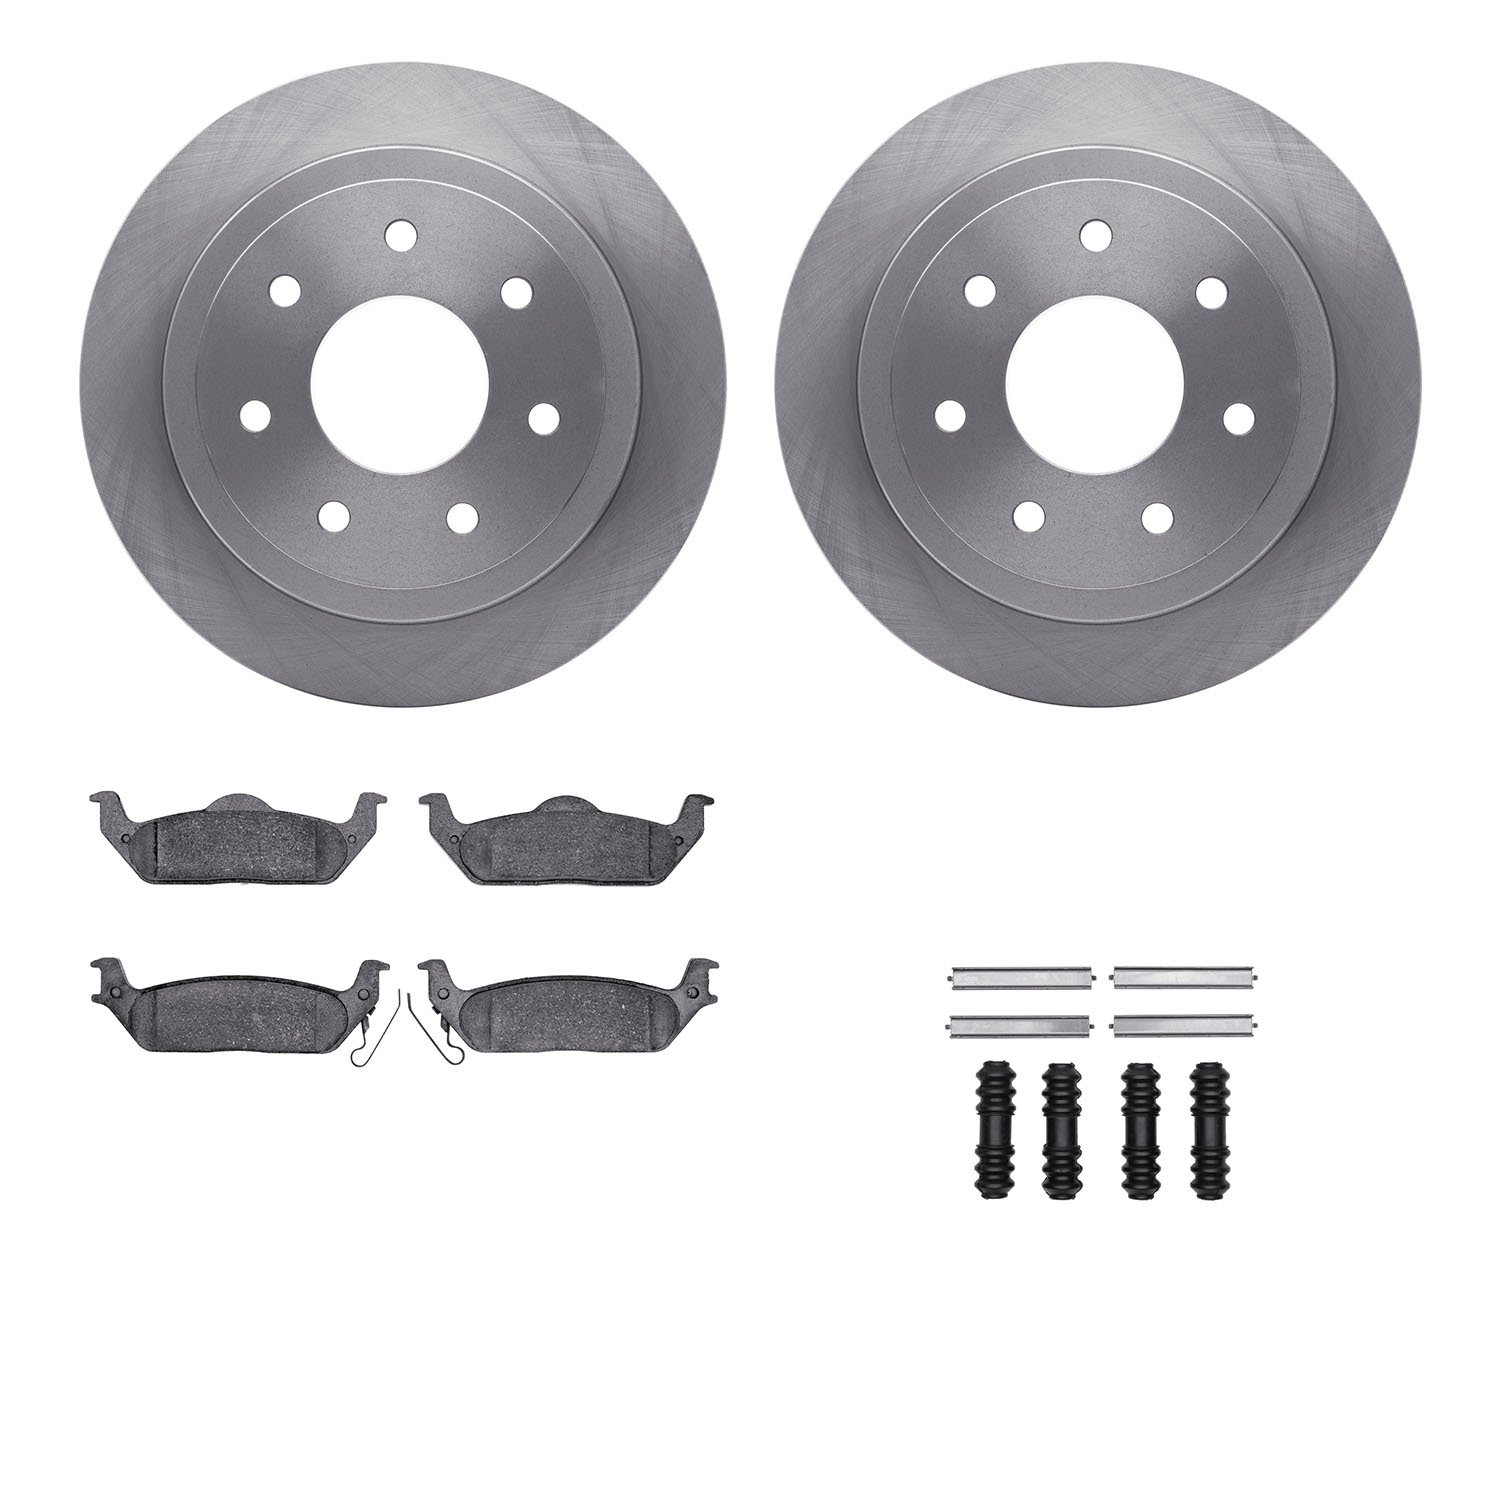 6412-54224 Brake Rotors with Ultimate-Duty Brake Pads Kit & Hardware, 2004-2011 Ford/Lincoln/Mercury/Mazda, Position: Rear